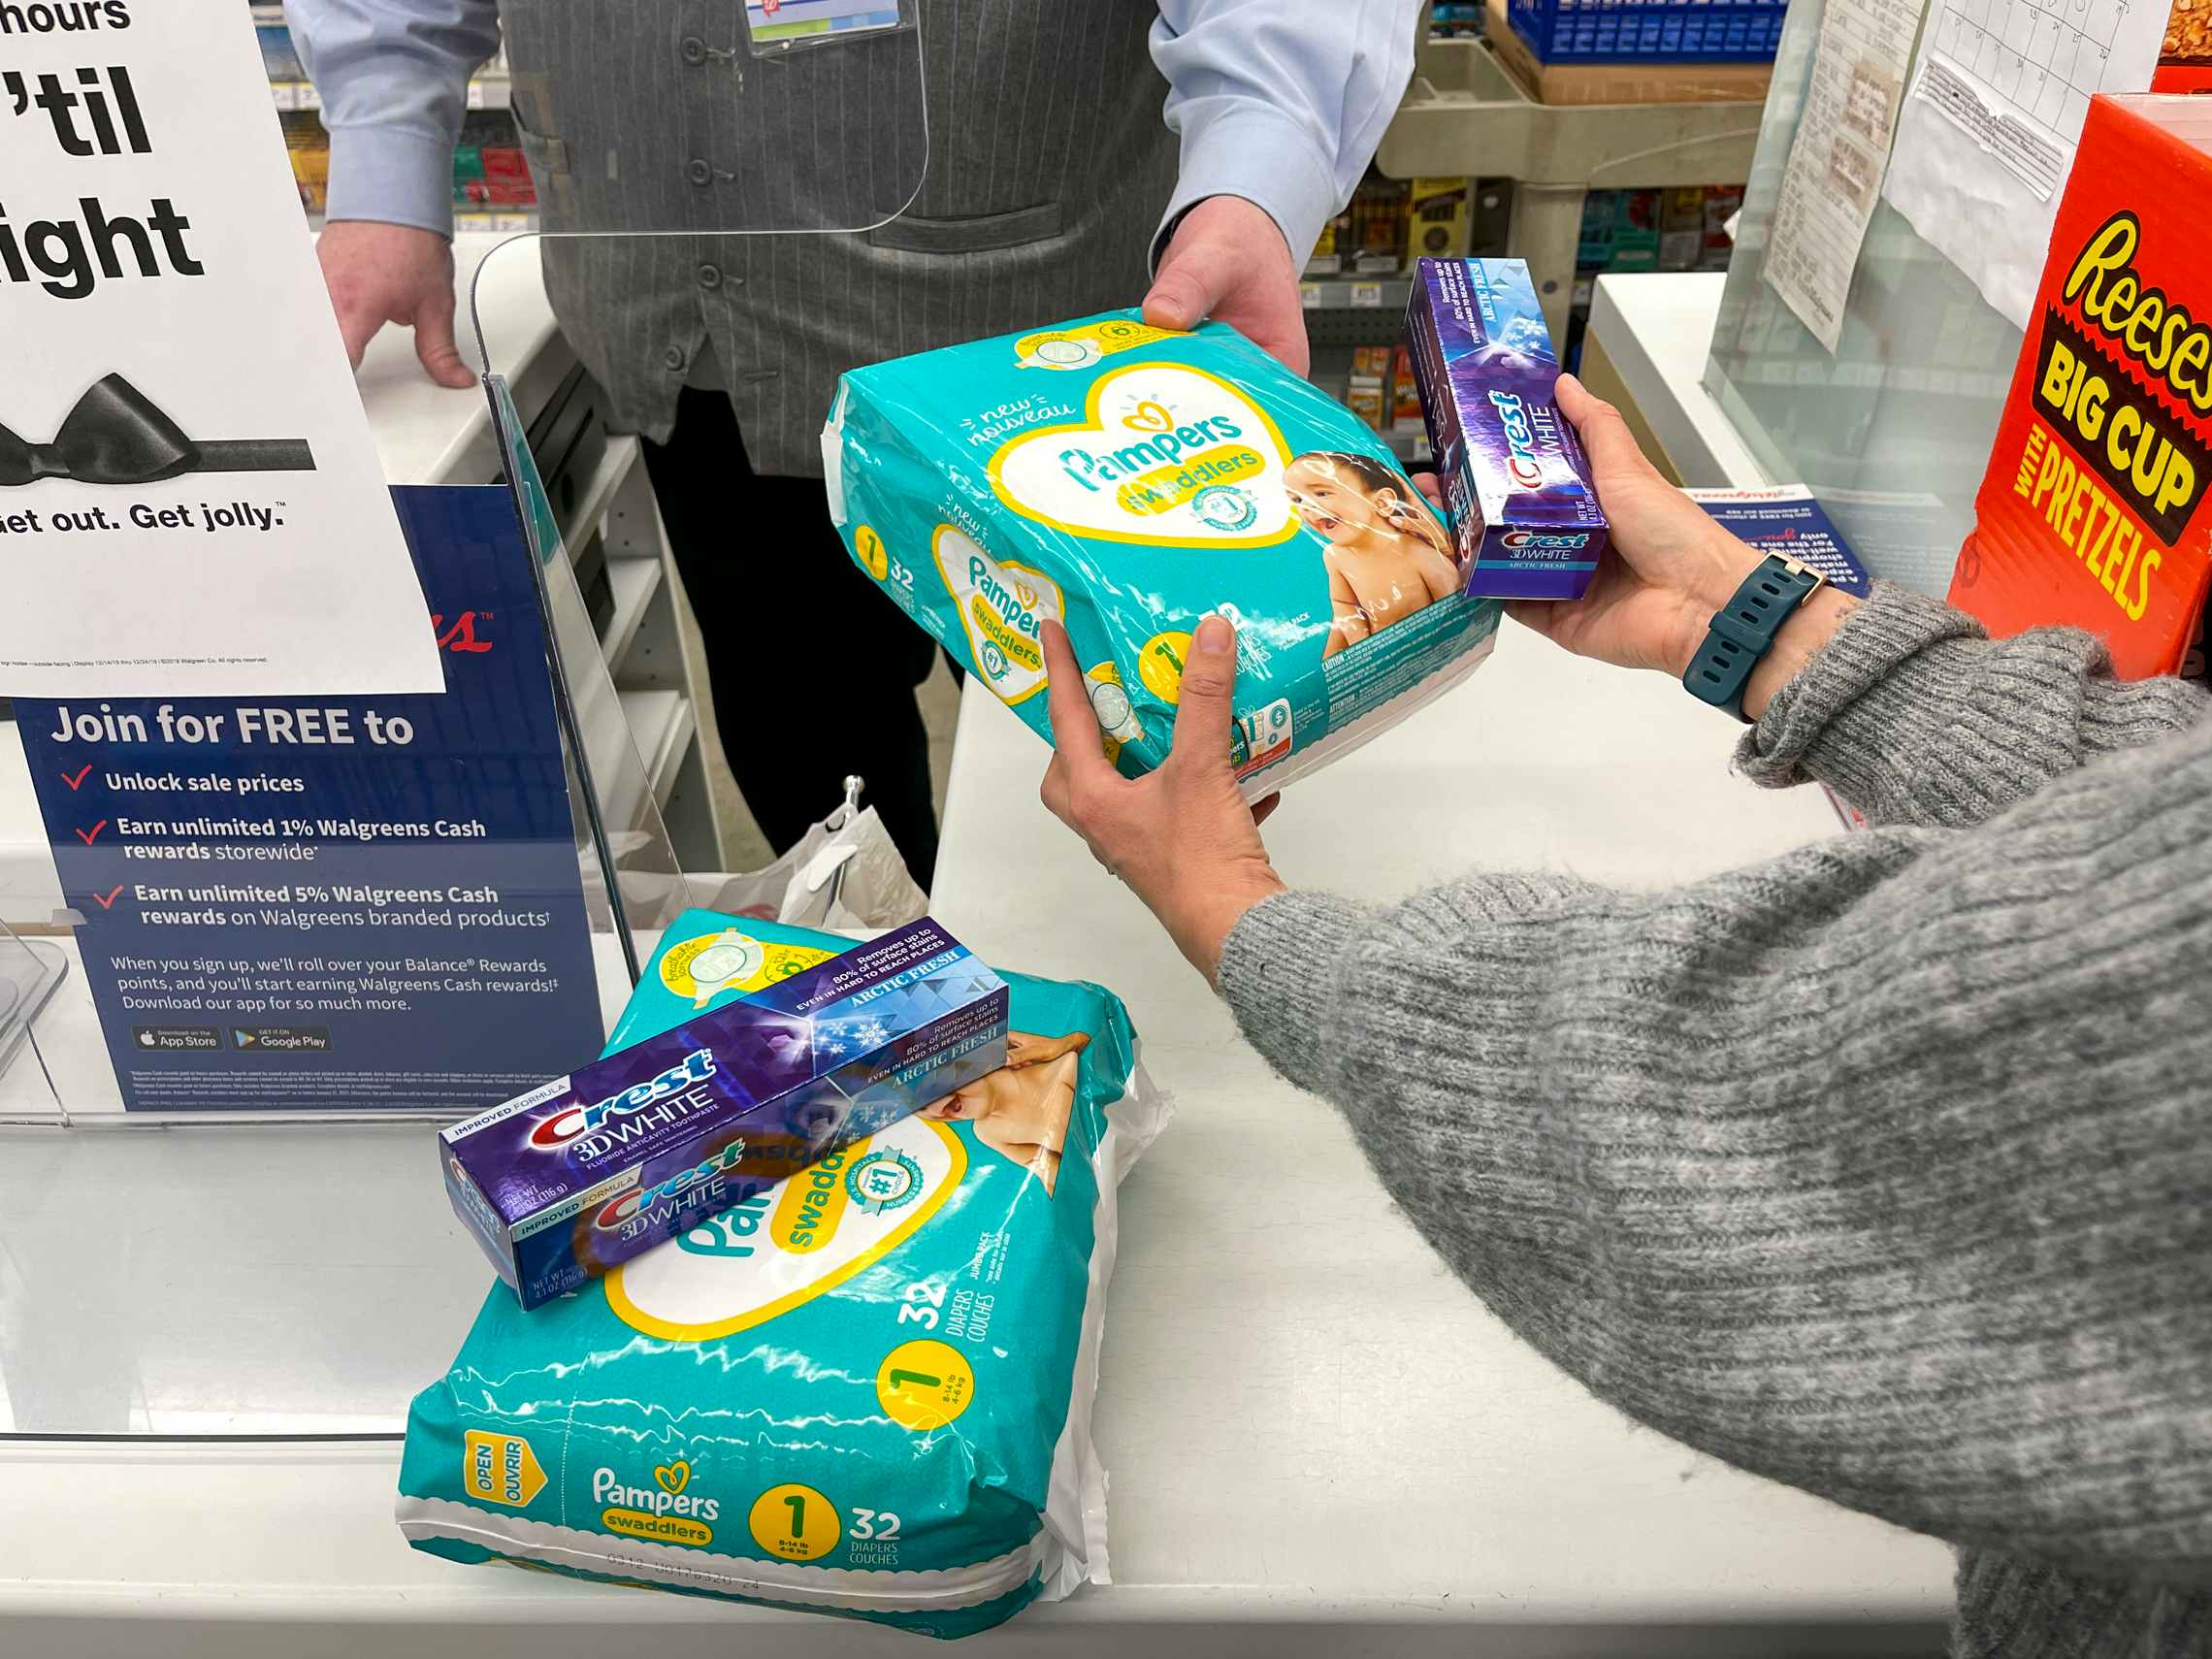 A woman handing a pack of pampers diapers and crest to a casher with a second pack of diapers and crest on the counter.